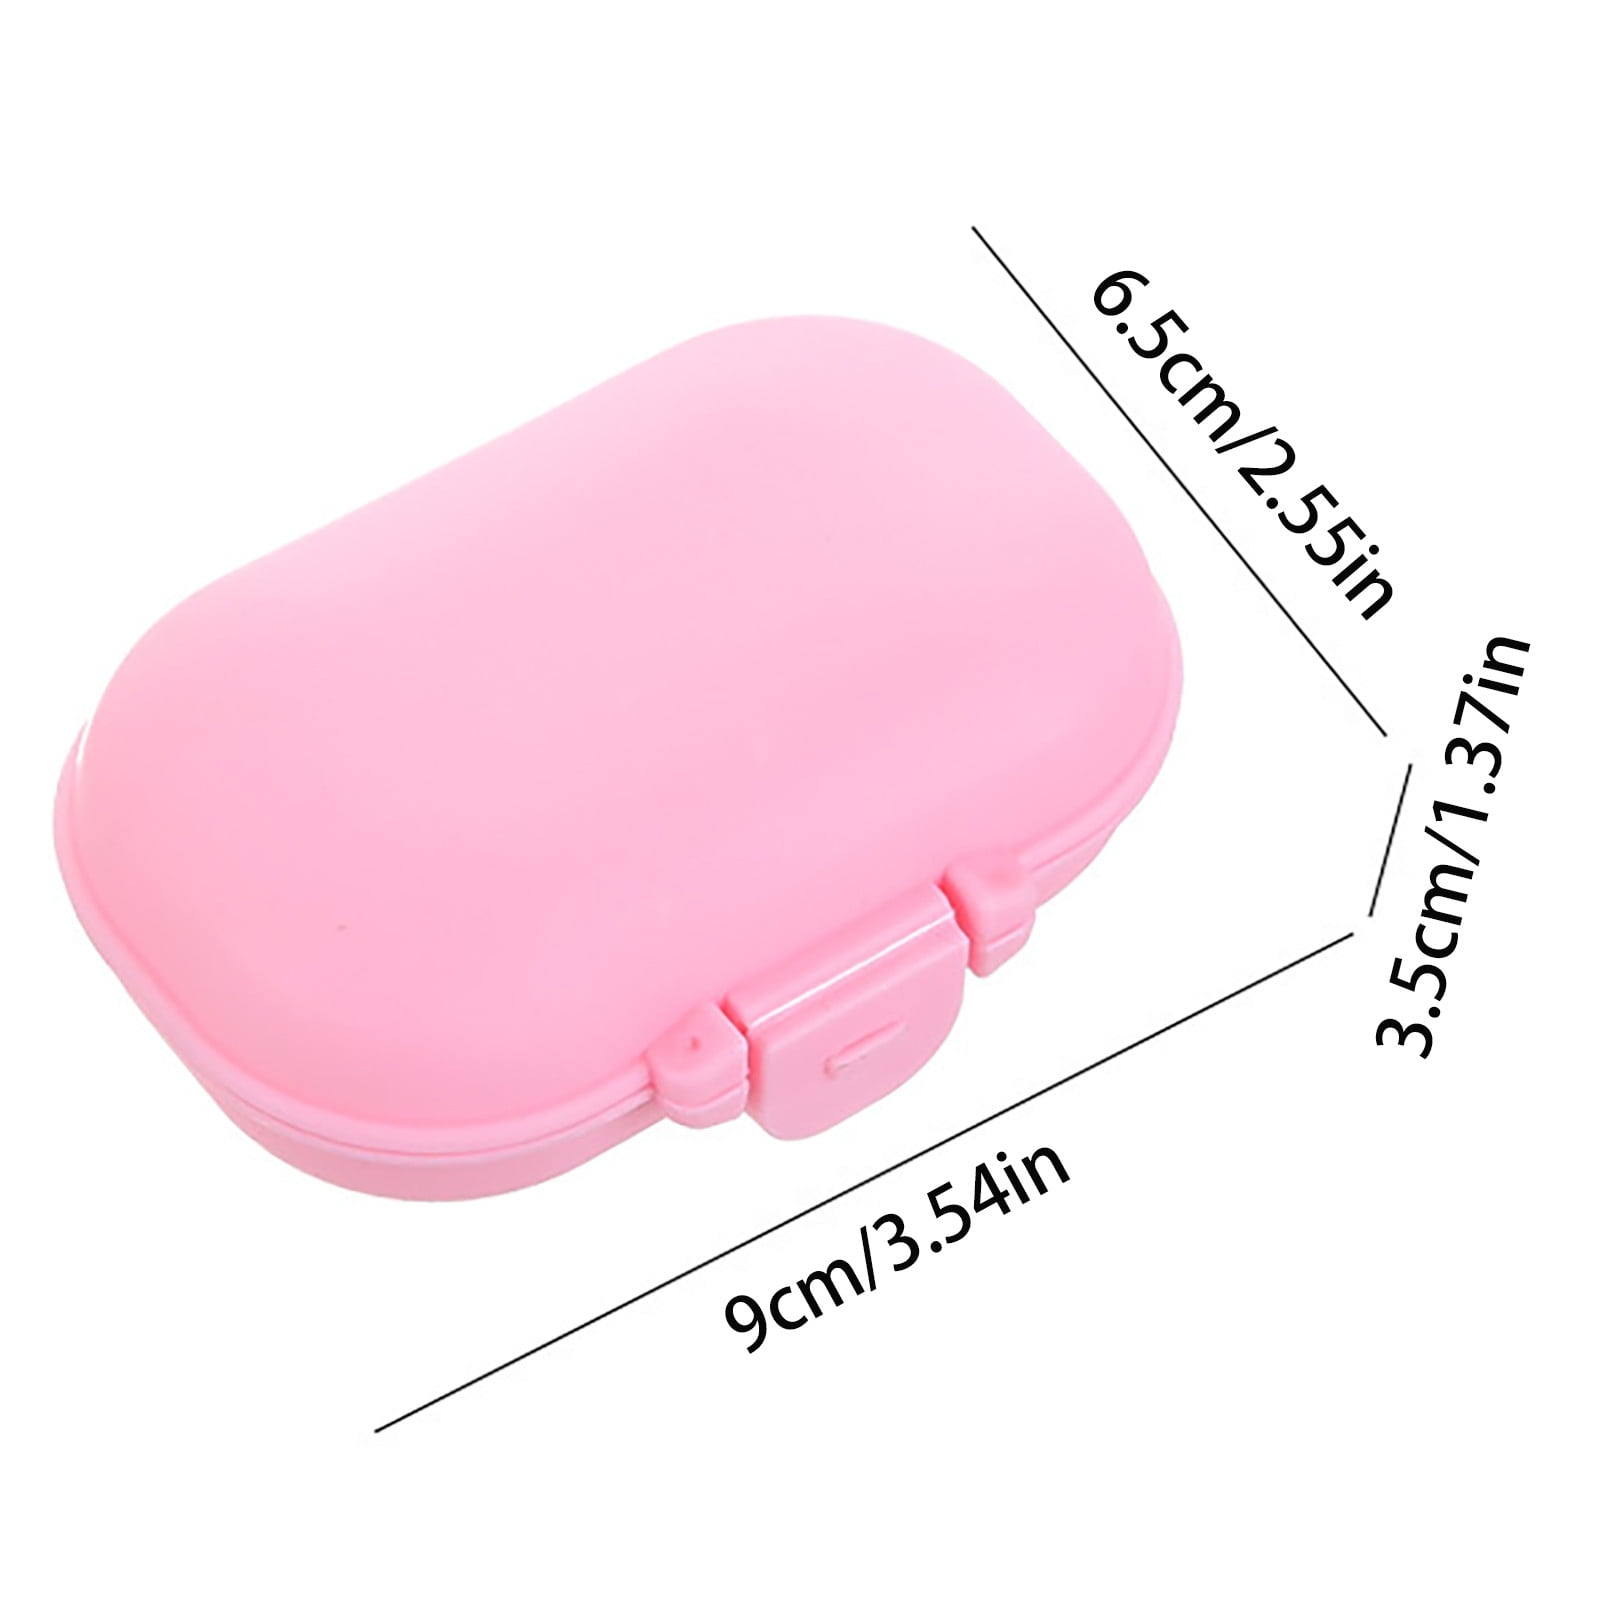 HSMQHJWE Better And Gardens Basket Daily Portable 4-Compartments Travel Medicine  Organizer Moisture Proof Small Medicine Box For Pocket Purse Towel Closet 